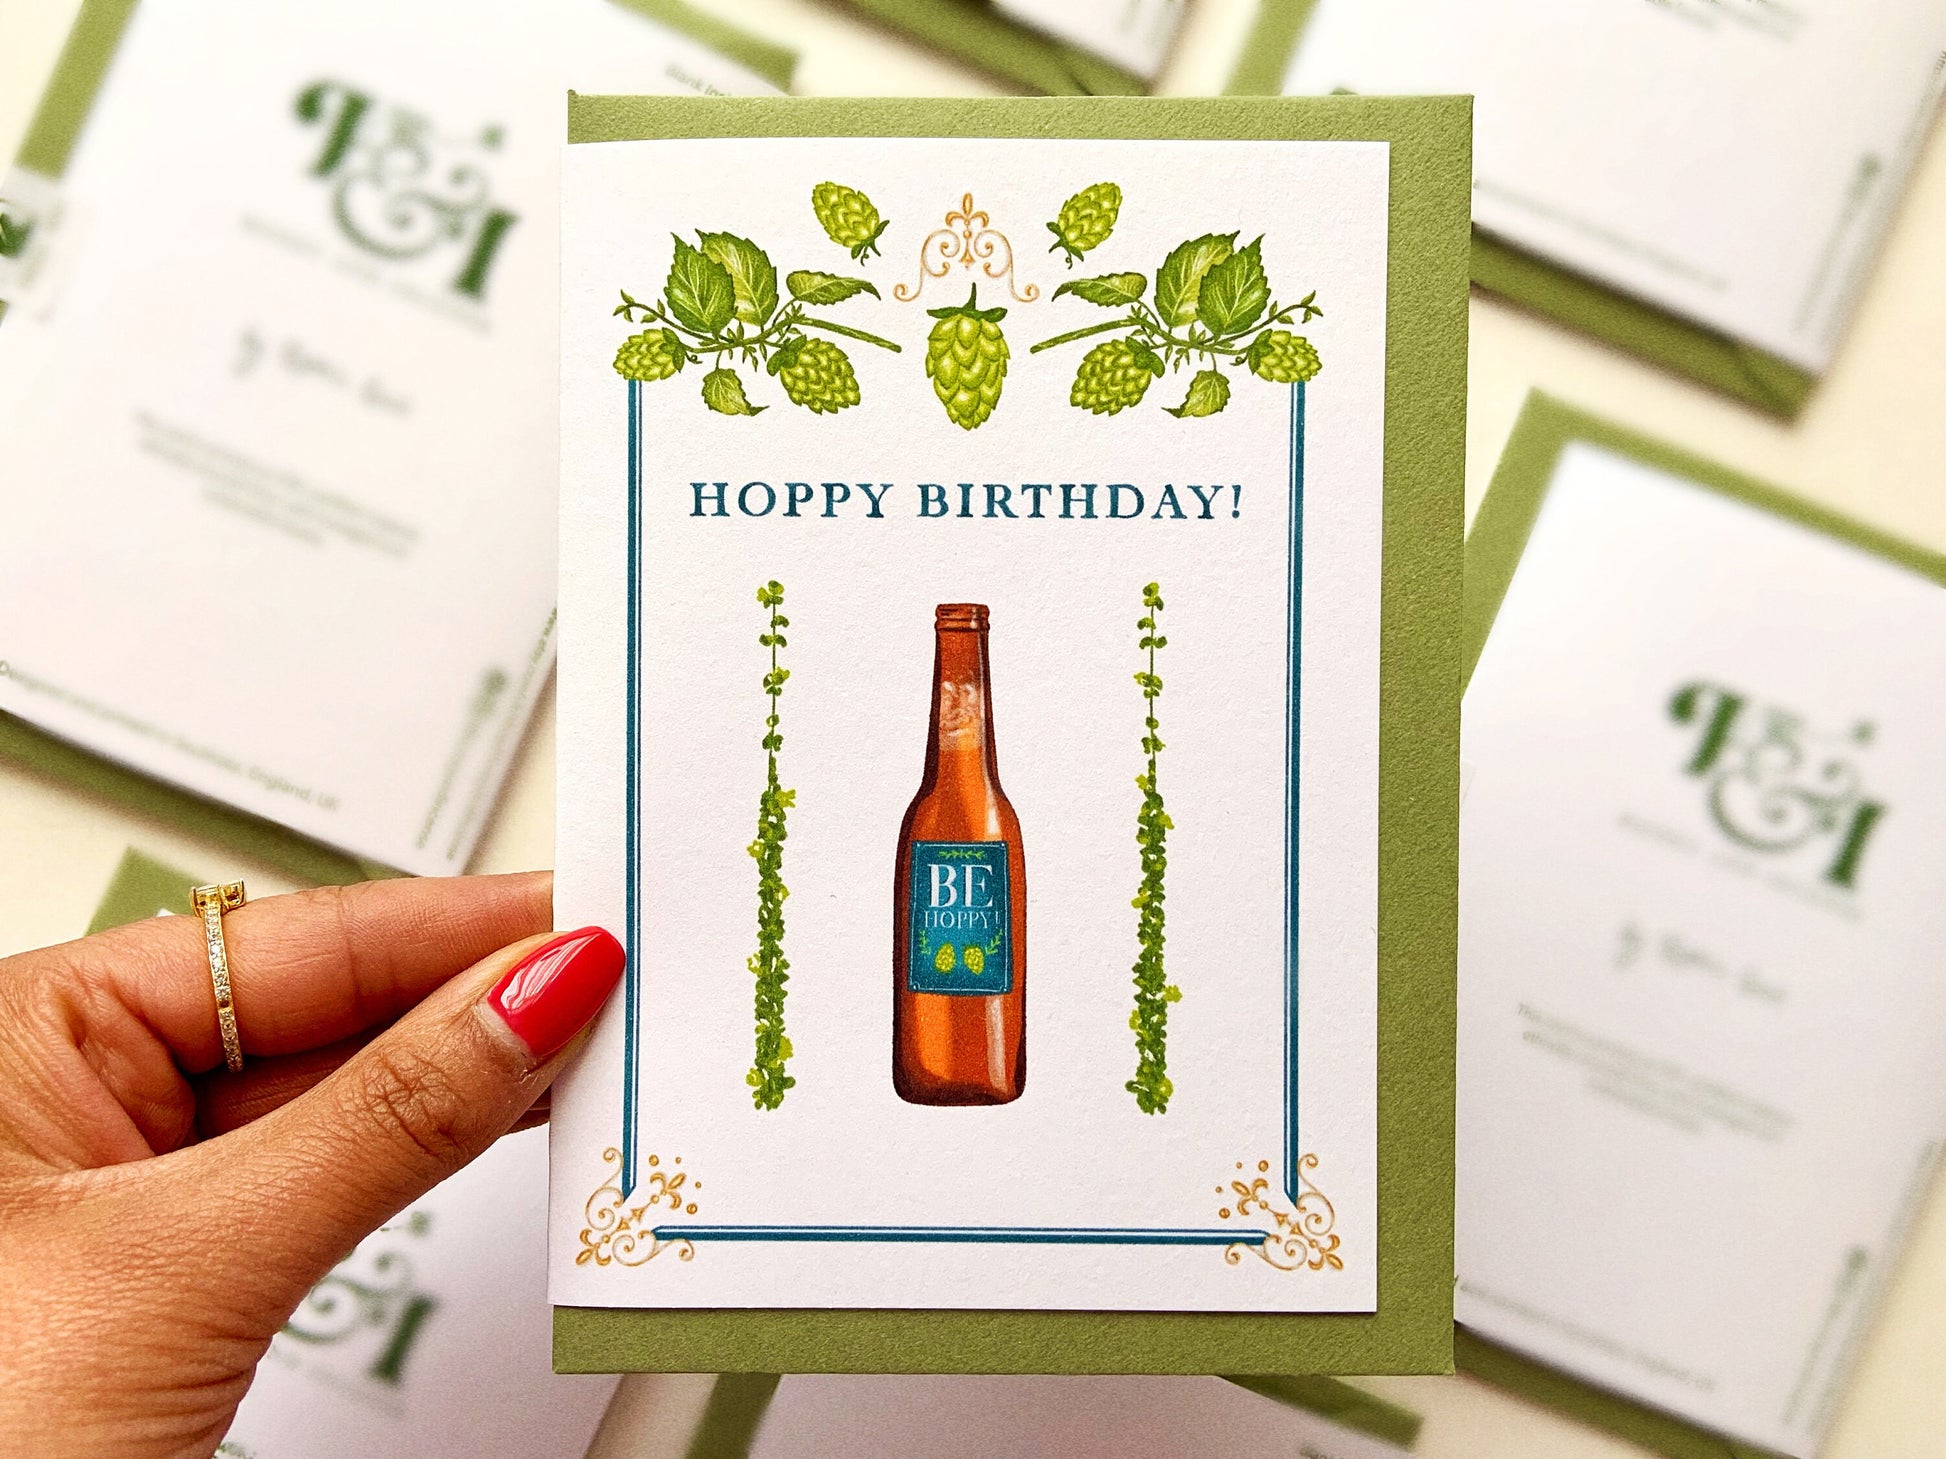 Beer Birthday card reading "hoppy birthday" and a bottle of beer with hops around it 